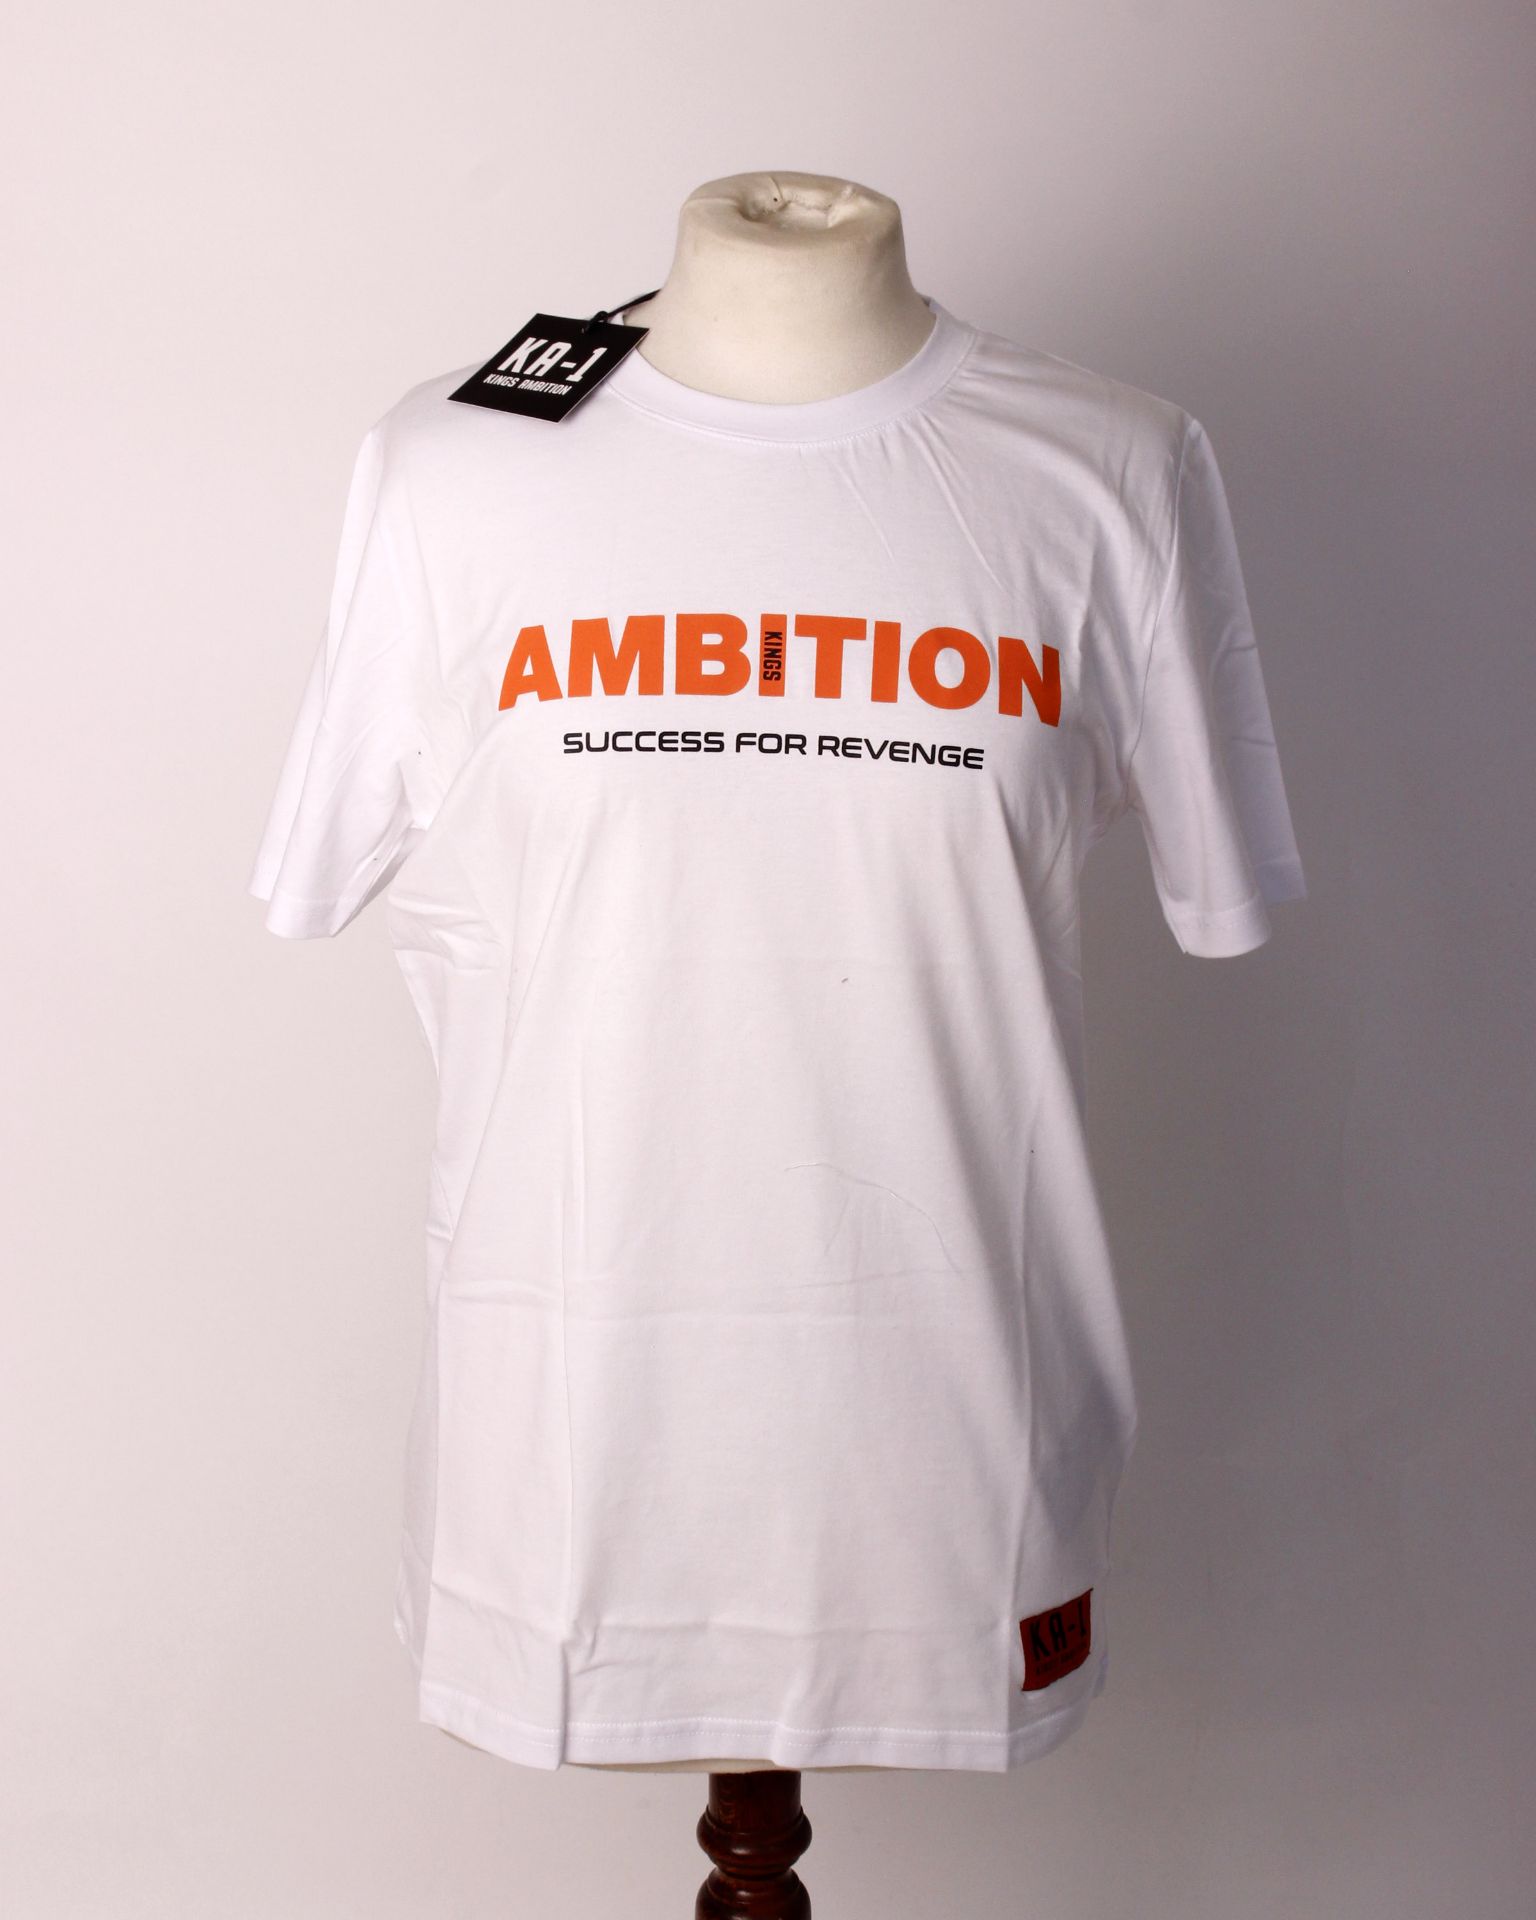 One man's as new Kings Ambition KA-1 t-shirt in white (XS, KW20-10). - Image 3 of 6